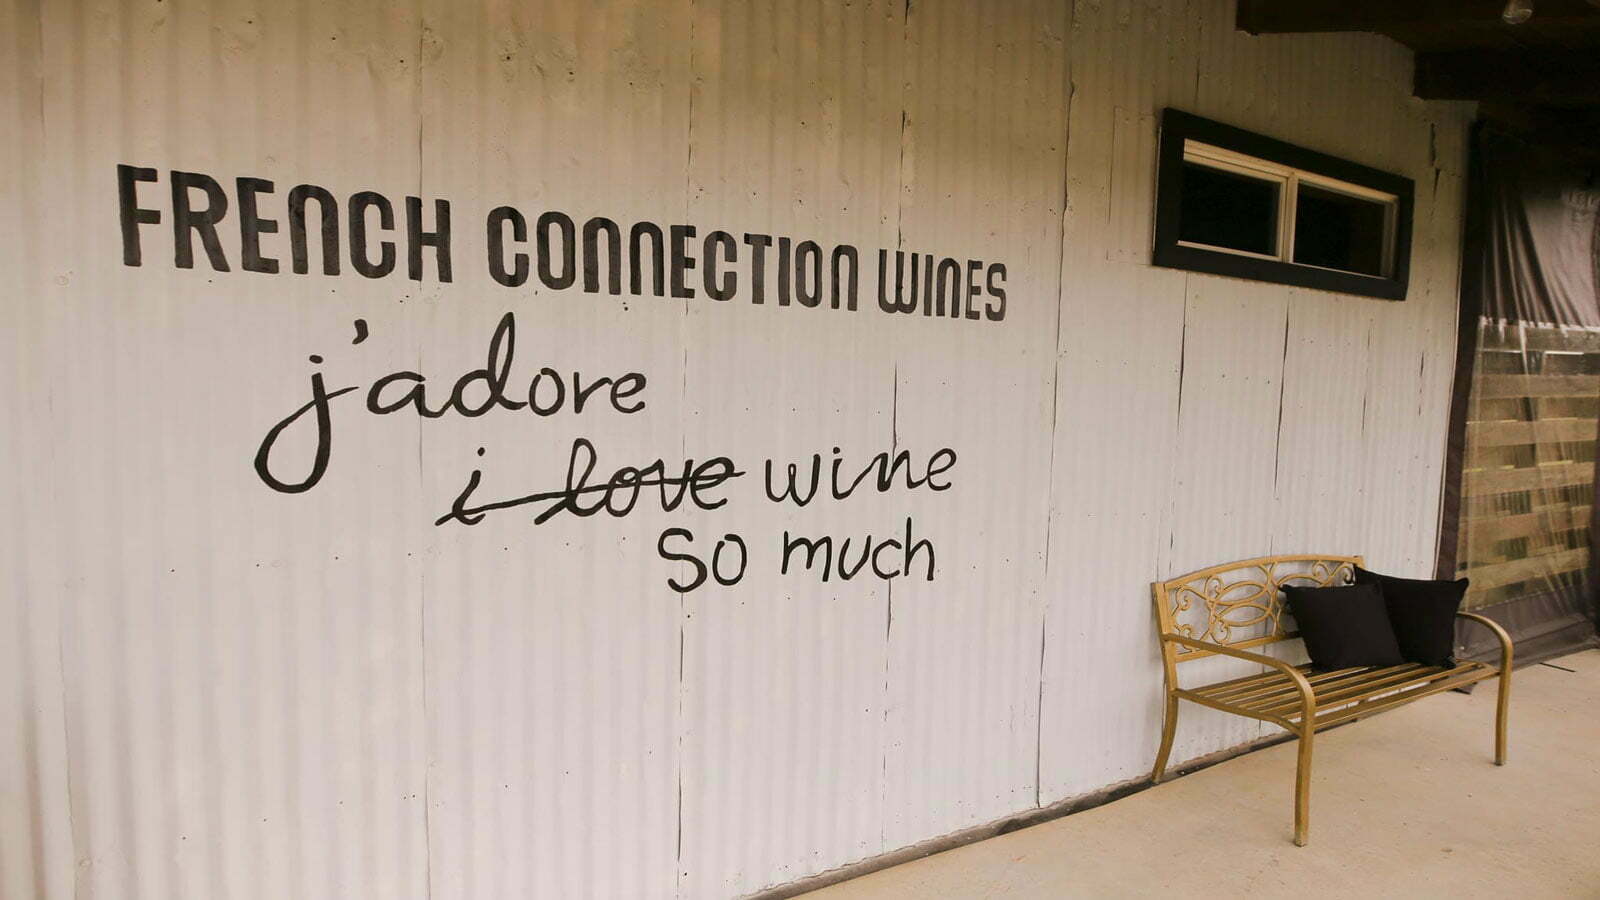 <p><em>Address: 1197 Hye-Albert Rd, Hye, TX 78635</em></p><p>One of the newer local wineries in the Texas Hill Country, <a href="https://www.frenchconnectionhye.com/" rel="nofollow noopener">French Connection</a> opened its doors in 2019 and has impressed wine lovers ever since. This fun and quirky style winery that partners with ten different vineyards provides tastings by reservation only and will only accommodate walk-ins if there is room.</p><p>Additionally, they offer thoughtfully selected French-inspired charcuterie boards and desserts to enjoy with your 2022 Viognier Bingham Family Vineyard, sourced from the TX High Plains.</p>